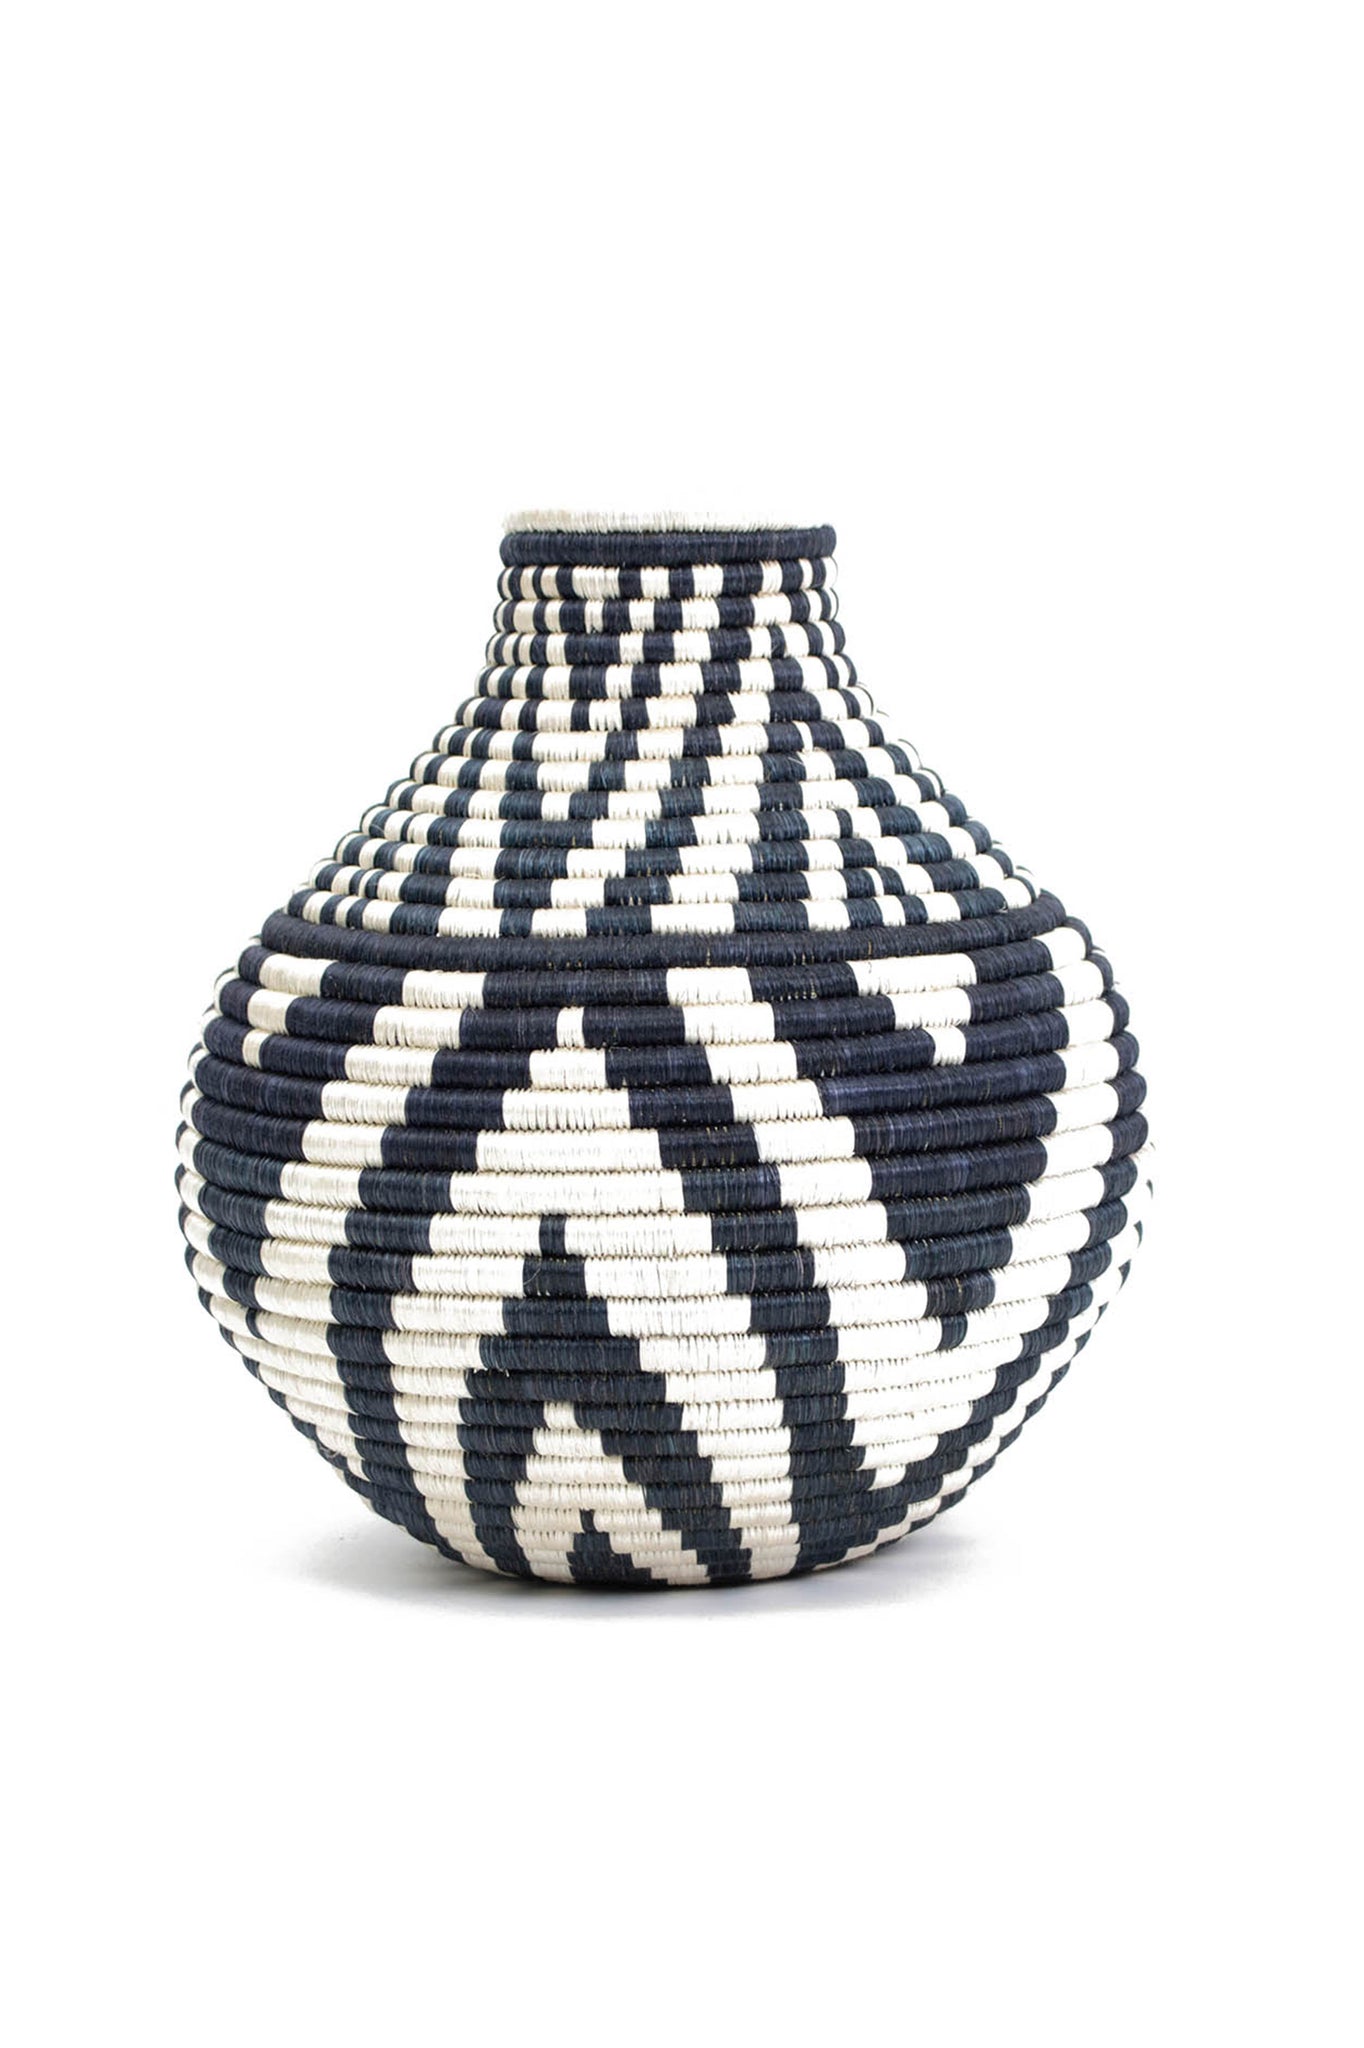 Black Mbao Vase by All Across Africa. Handwoven in Rwanda. Intricately crafted with timeless tradition, this carefully dyed sisal fiber and sweet grass vase makes a stunning statement piece. Color Black and White. 100% sisal.